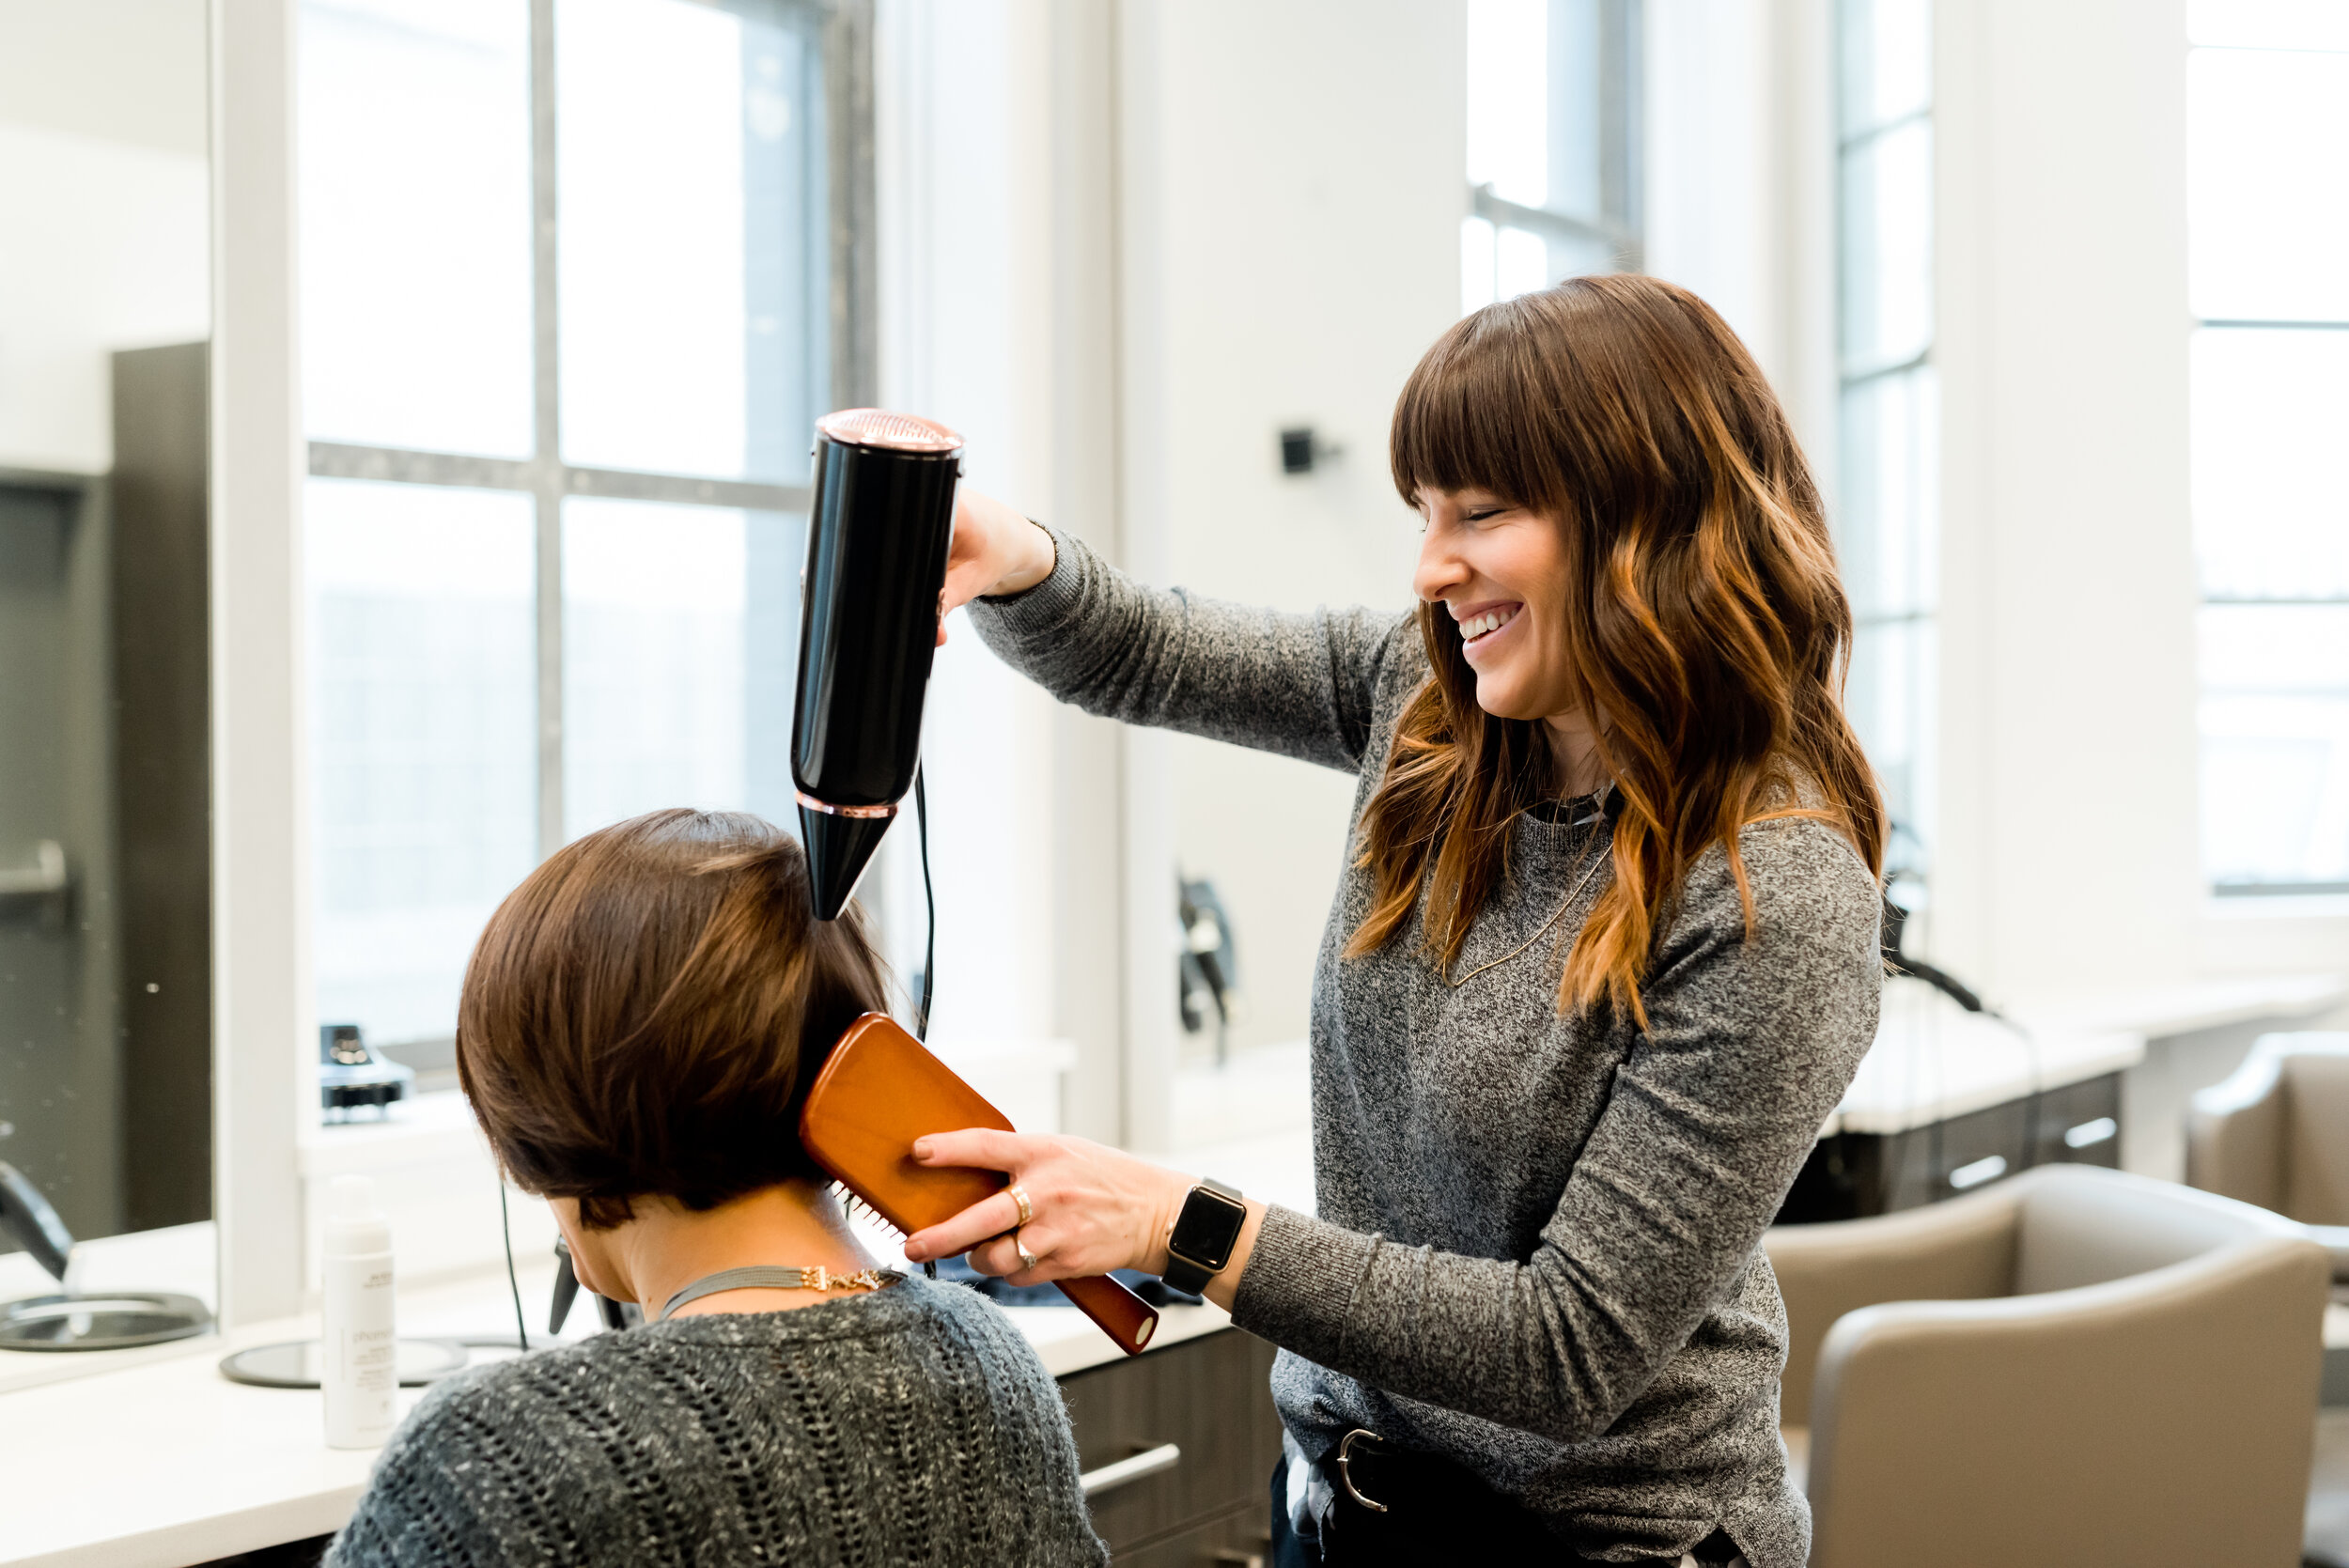 Blog Run Your Own Salon For The Same Price As Chair Rental